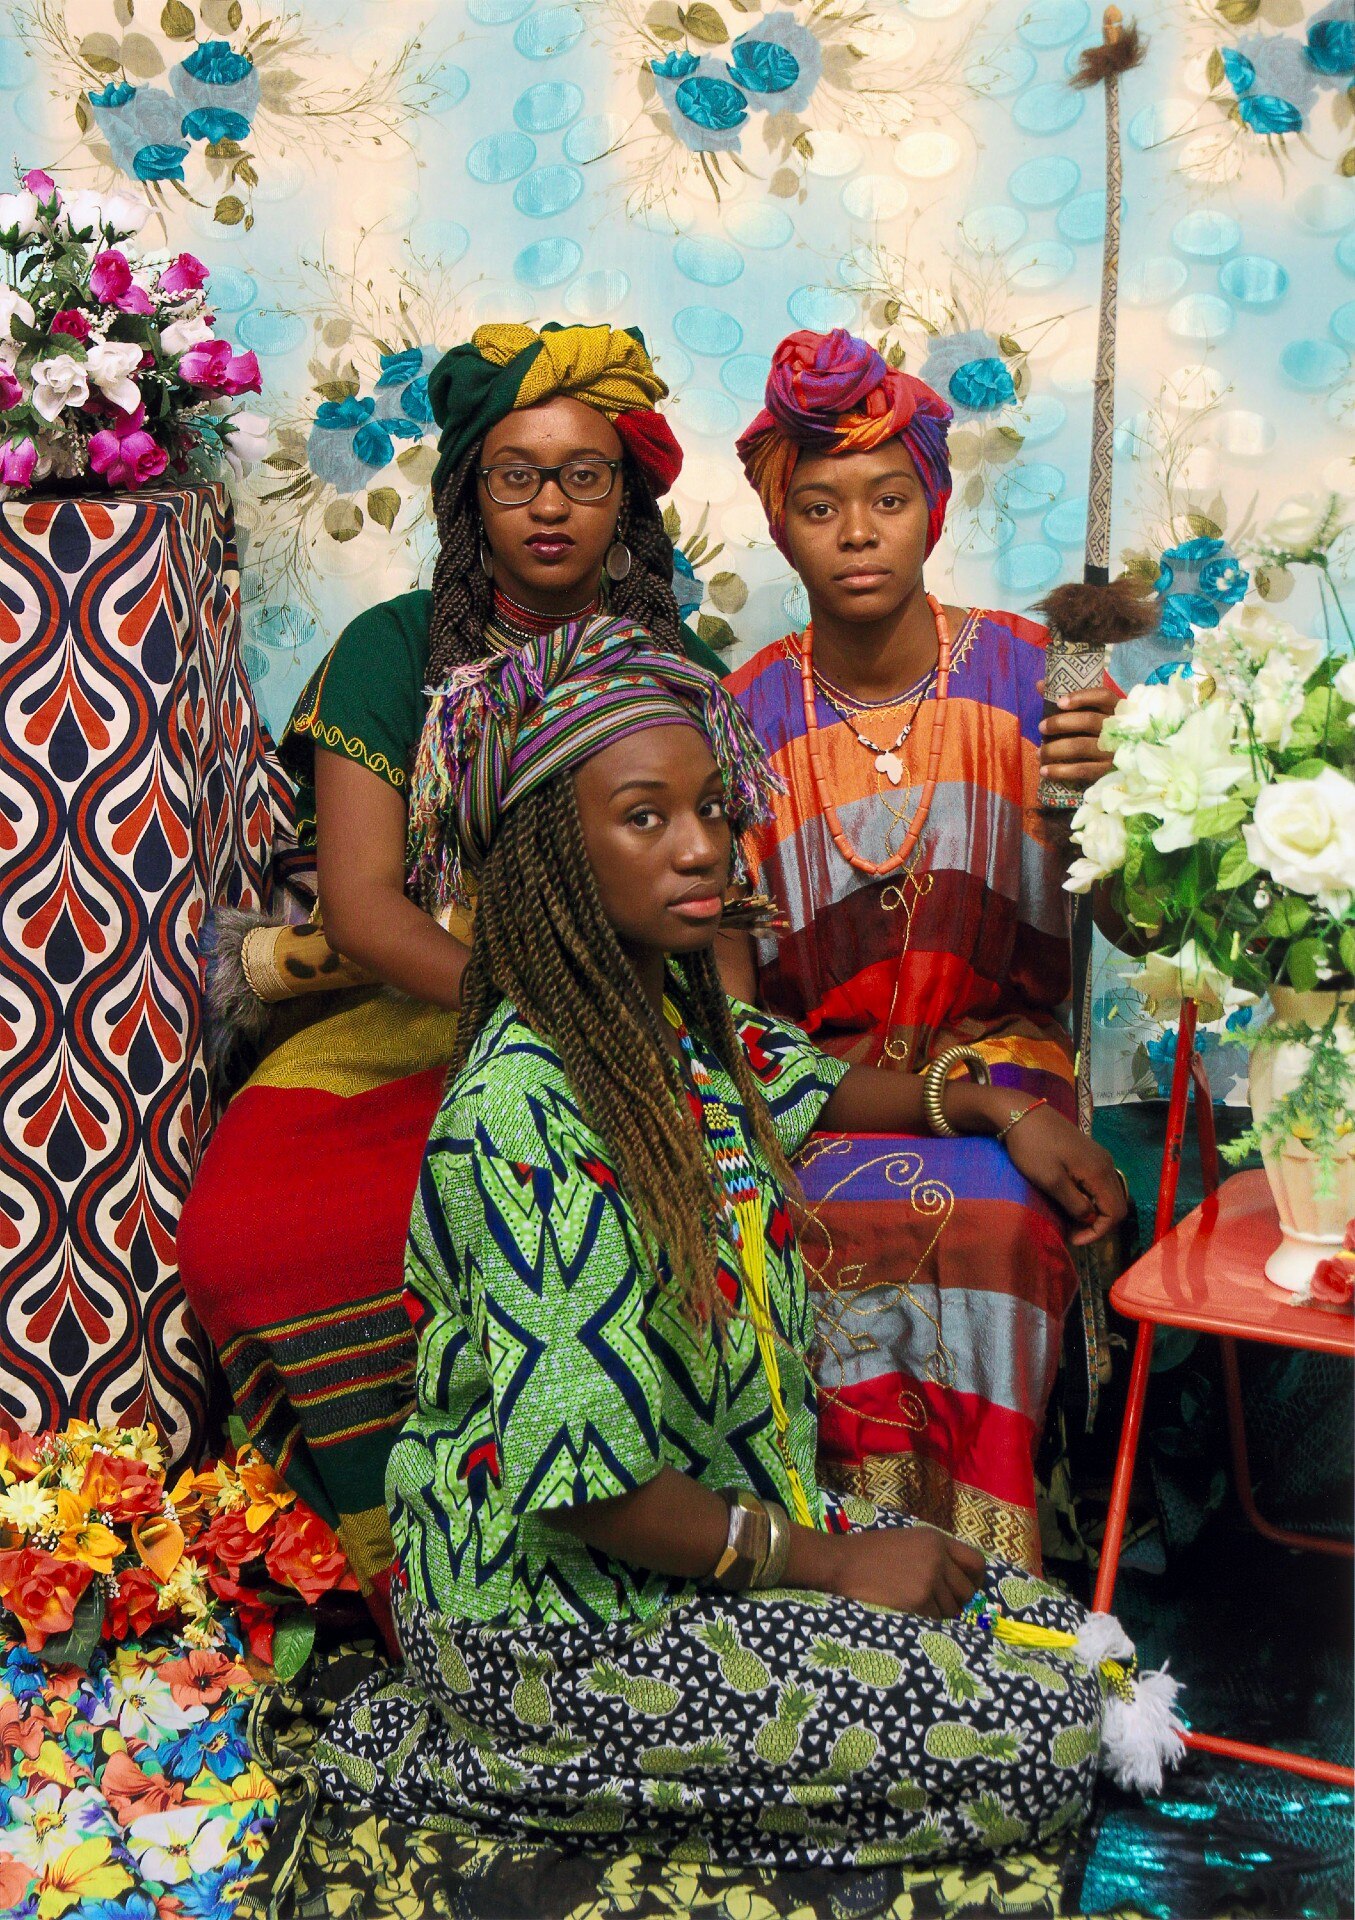 Three African women look expectantly into the camera. Two are sitting on chairs, while a second kneels in front of them